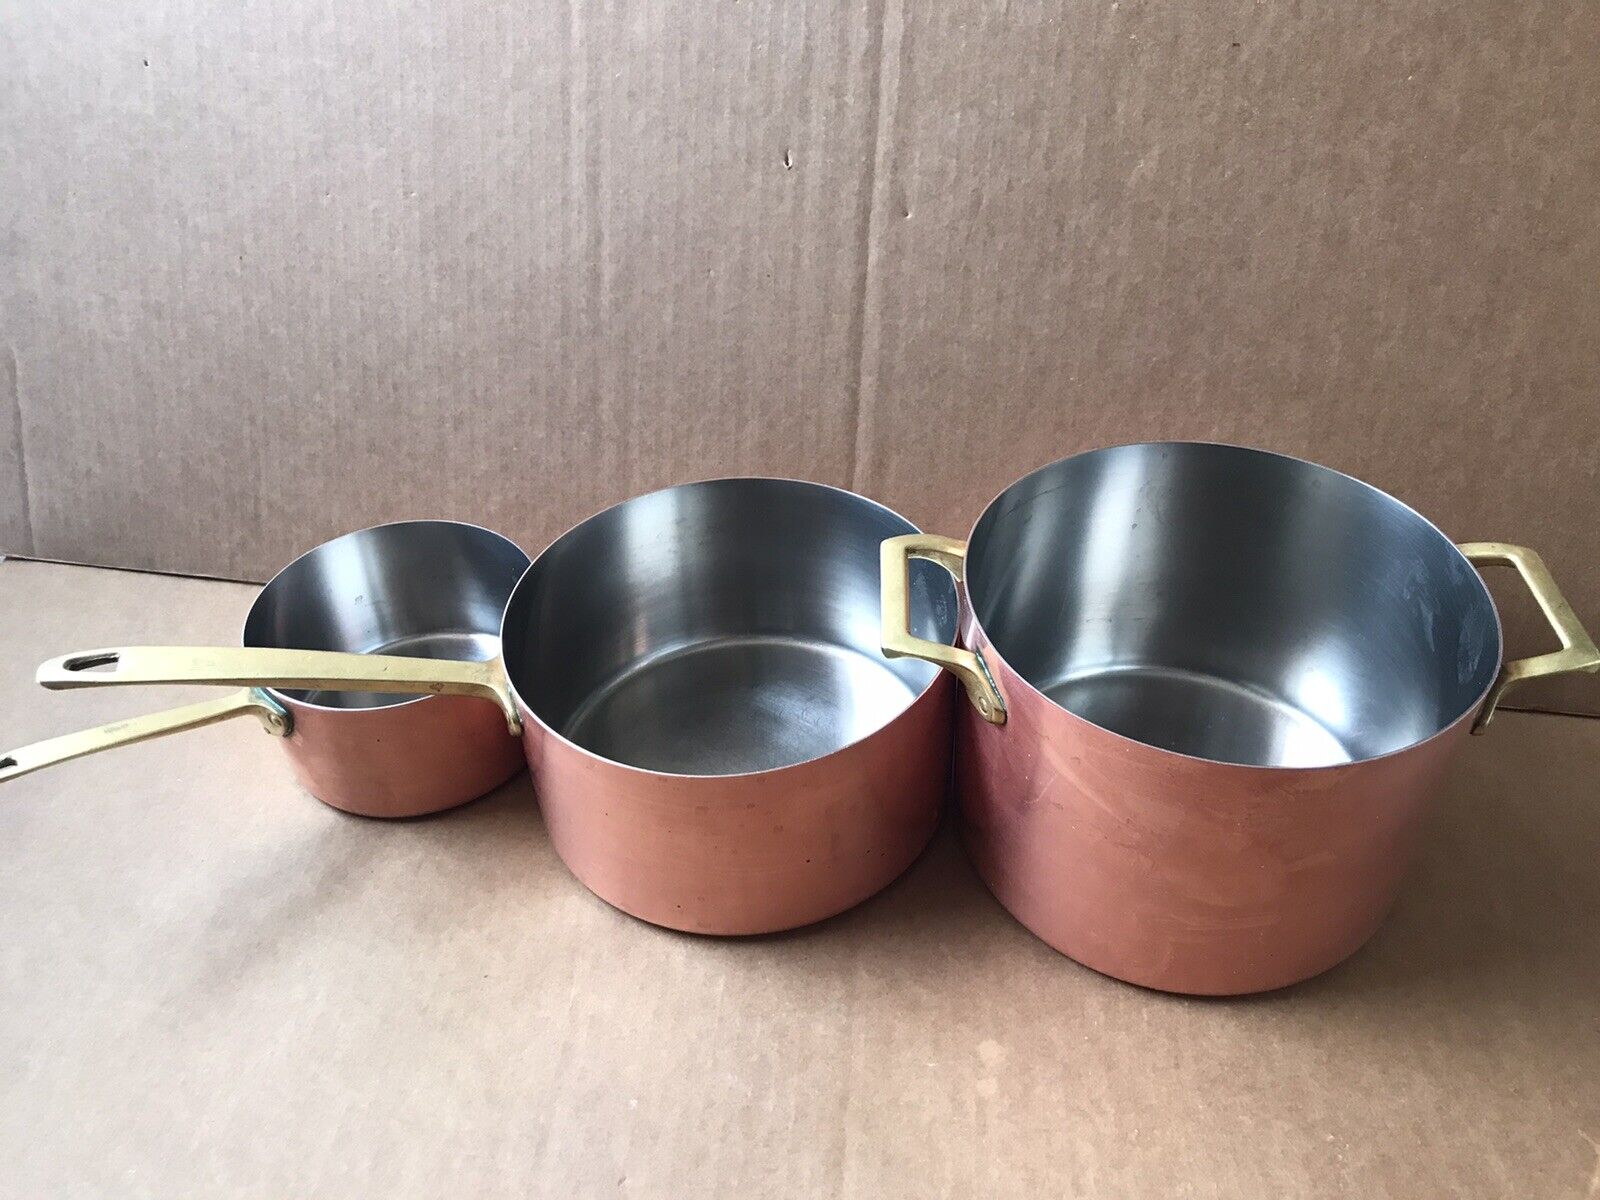 Paul Revere Limited Edition Copper Cook Ware 